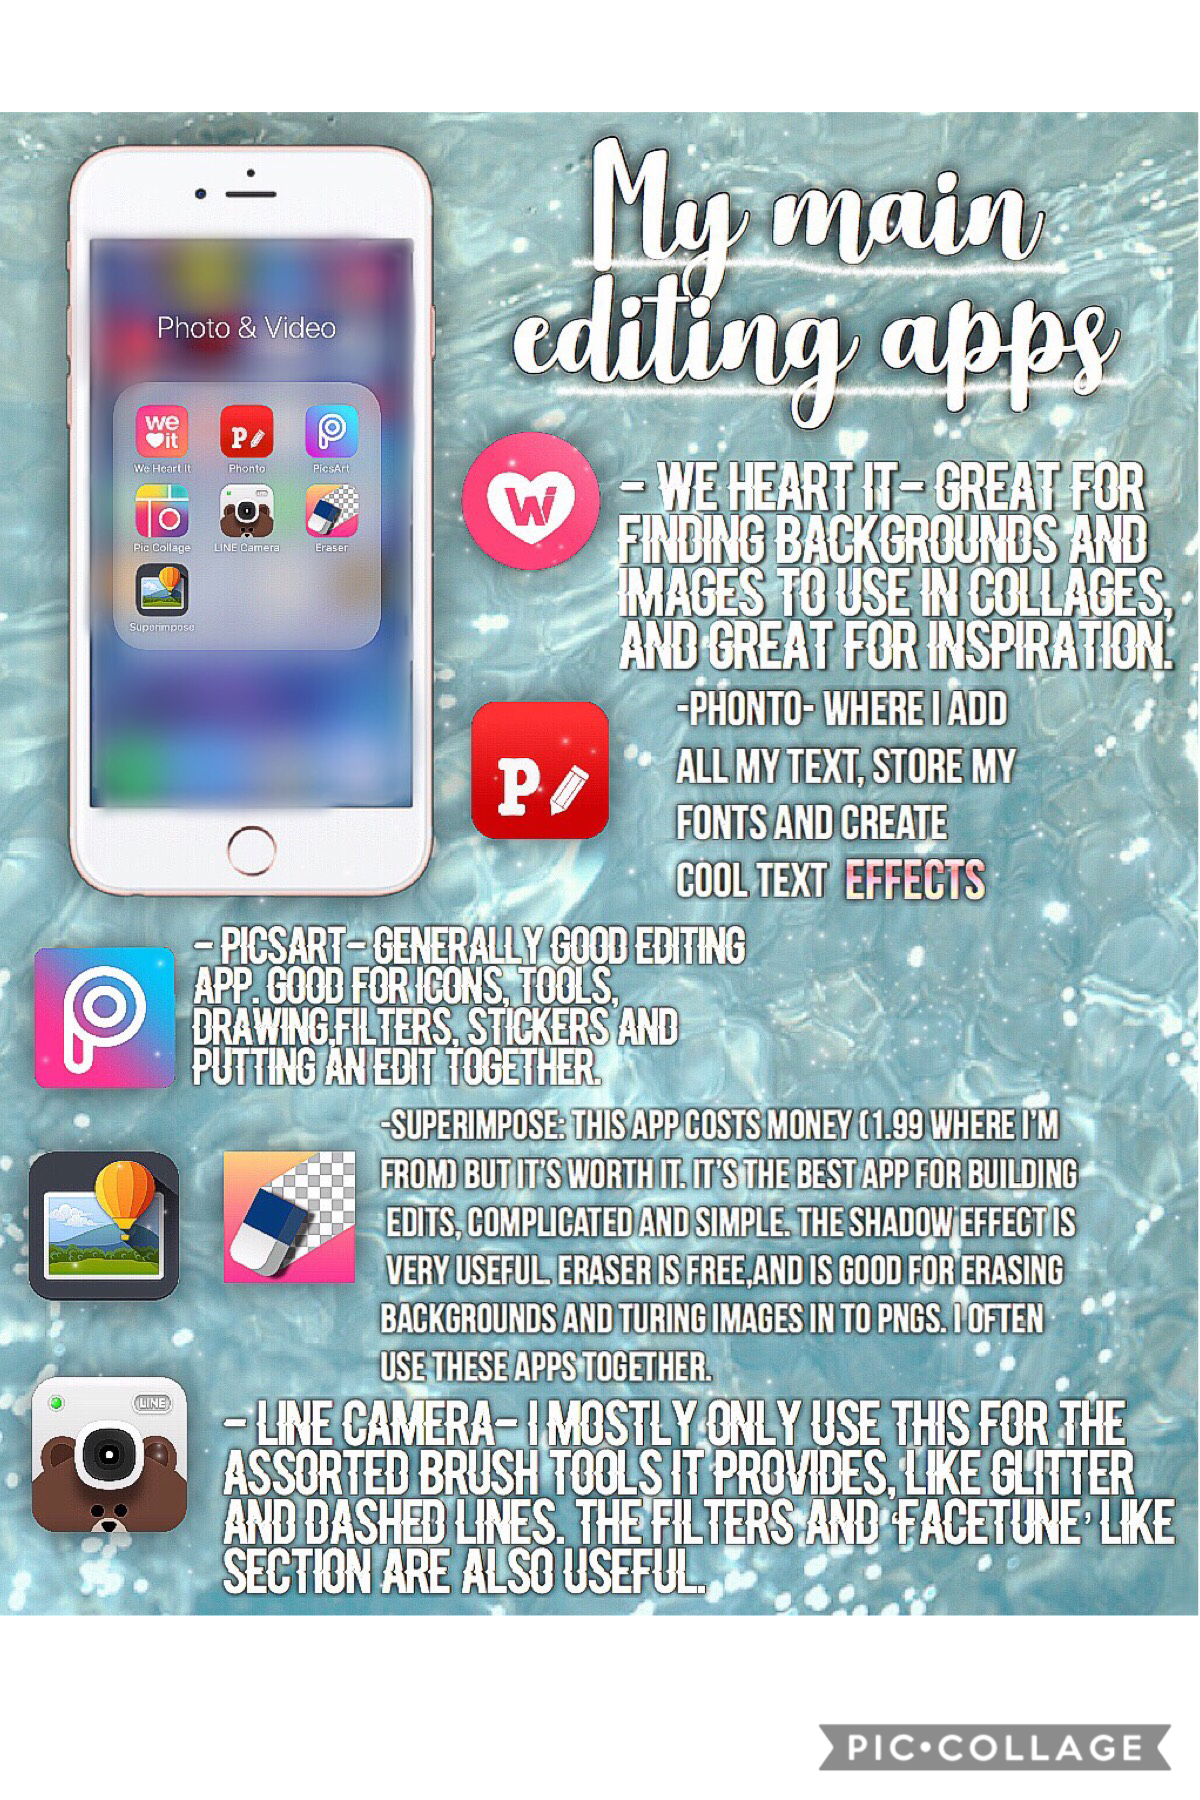 🌺My main Editing Apos🌺

I’ll be uploading an ‘unpopular editing apps’ tomorrow because a lot of them deserve more credit!!